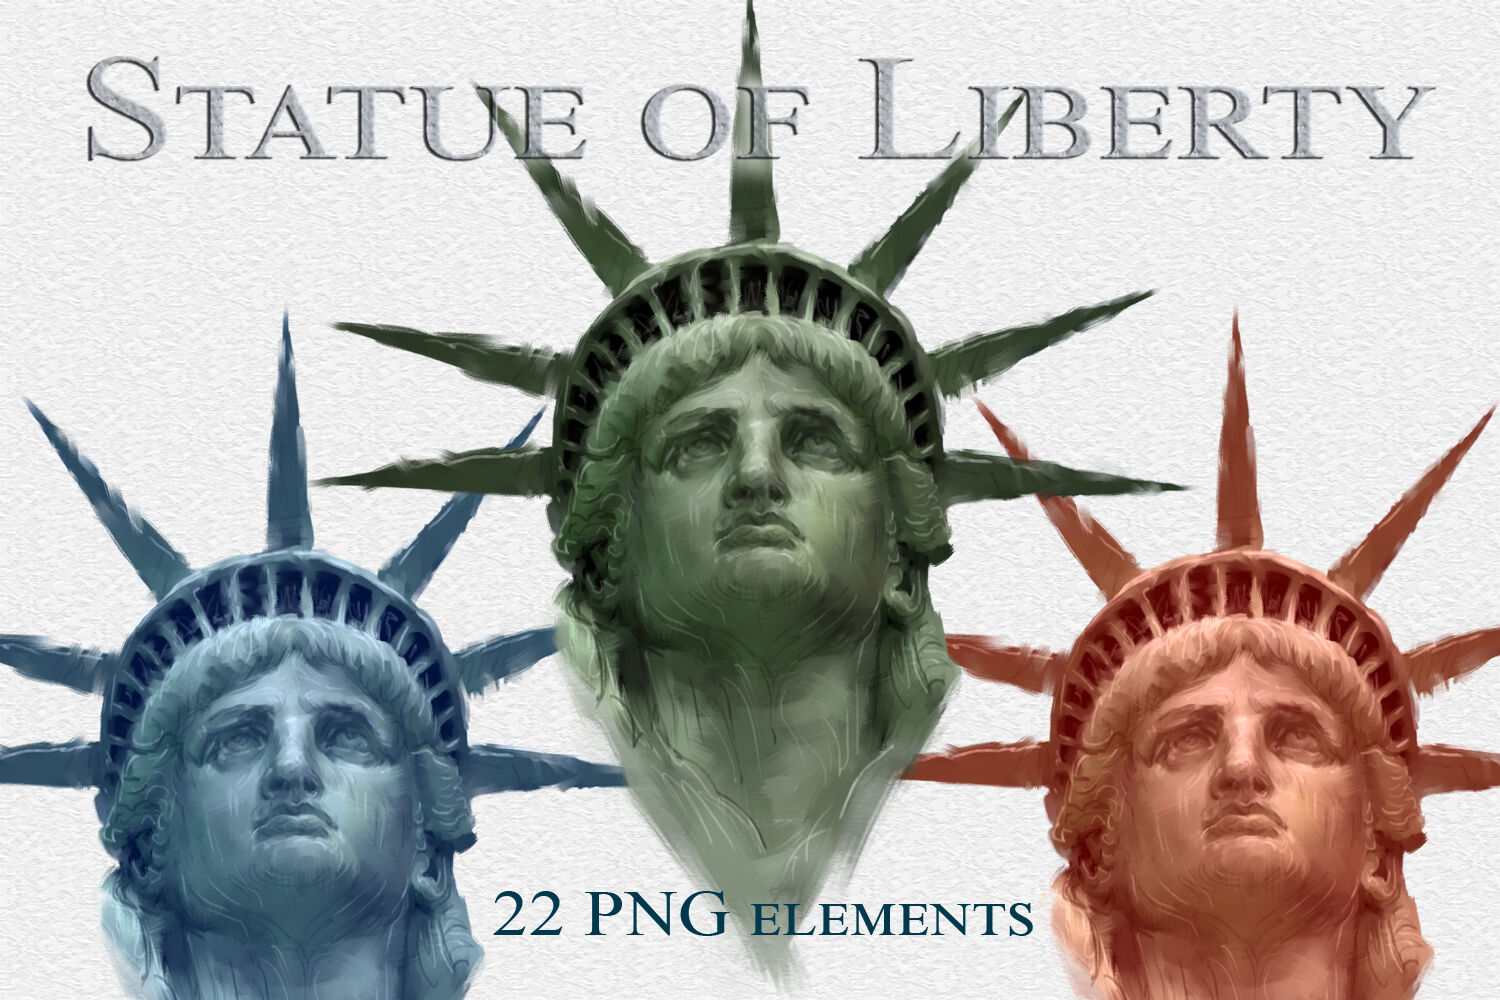 statue of liberty clipart png